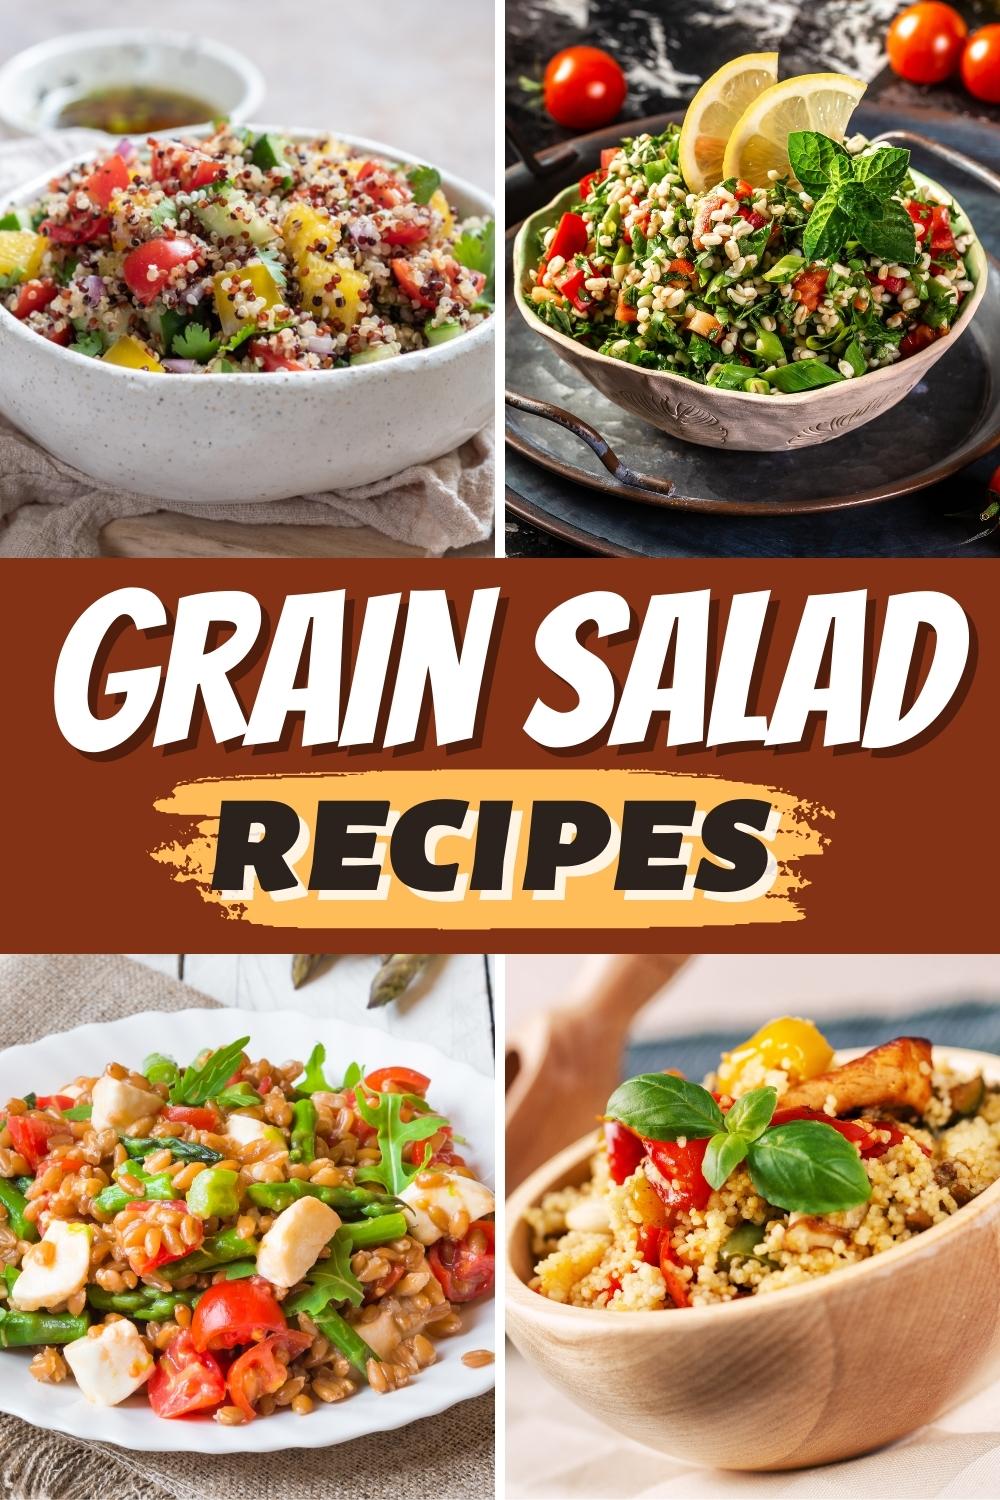 20 Grain Salad Recipes That Are So Full of Flavor - Insanely Good